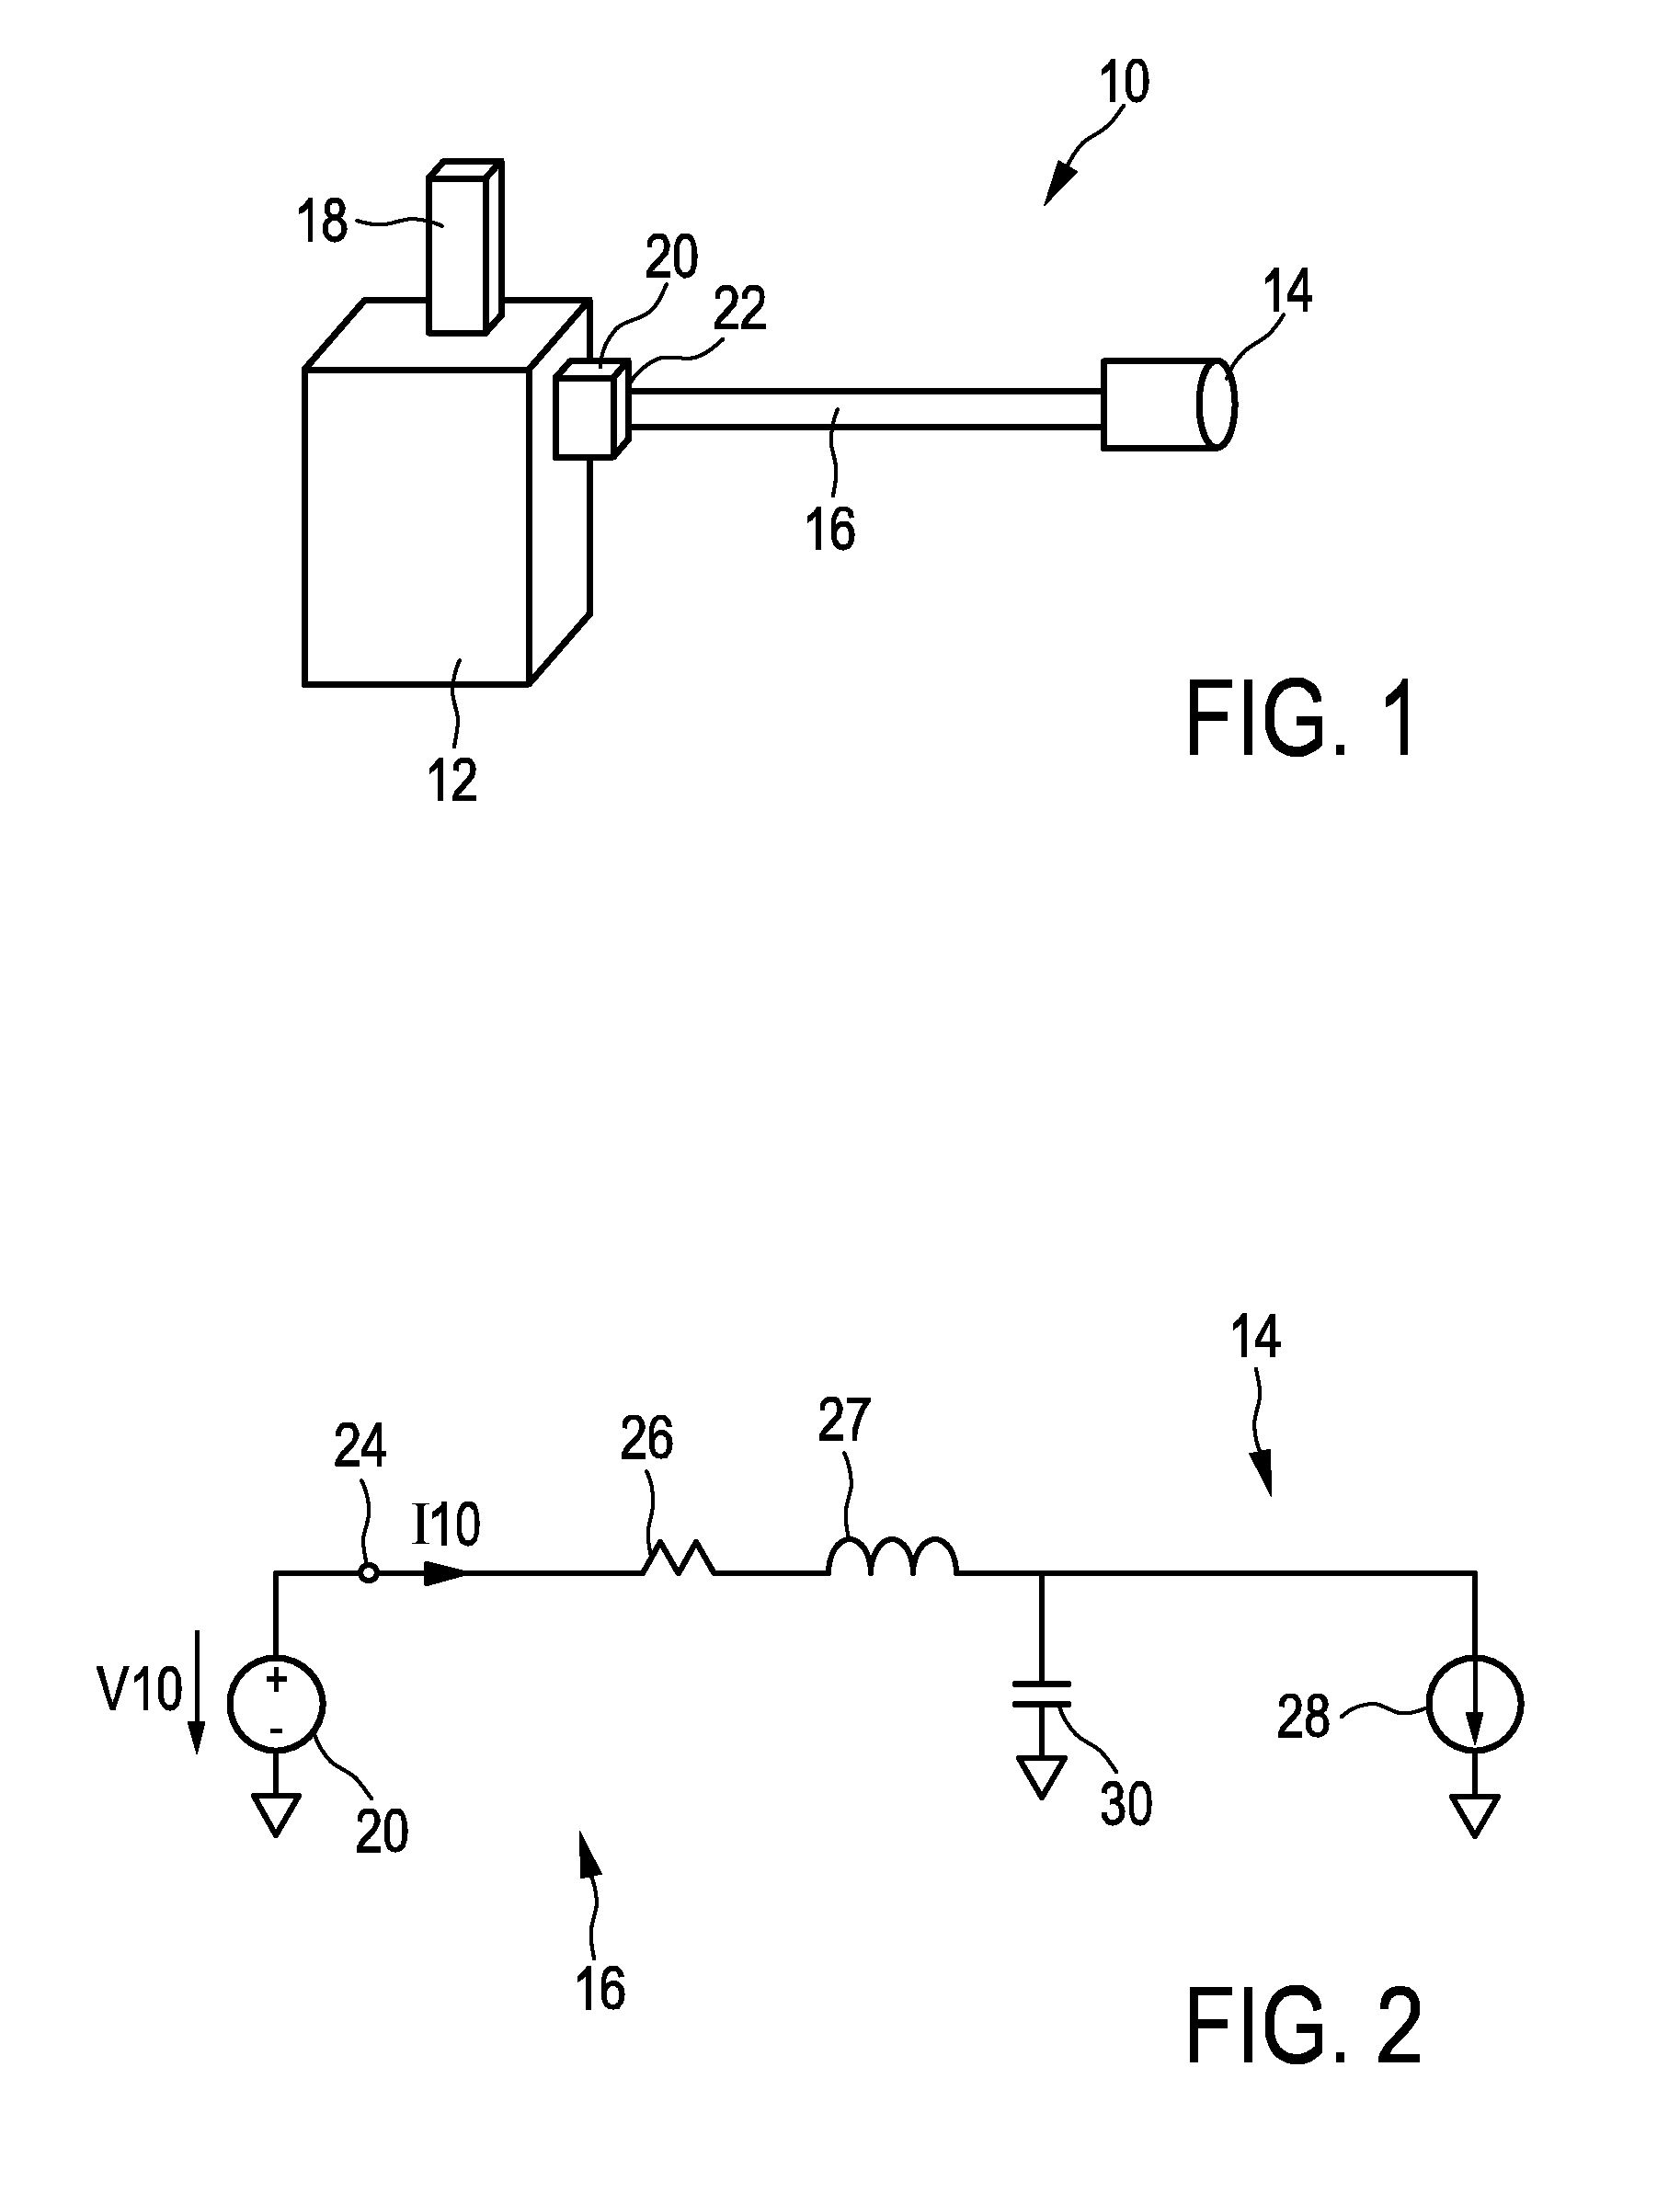 Ultrasound tranducer assembly and method for driving an ultrasound transducer head